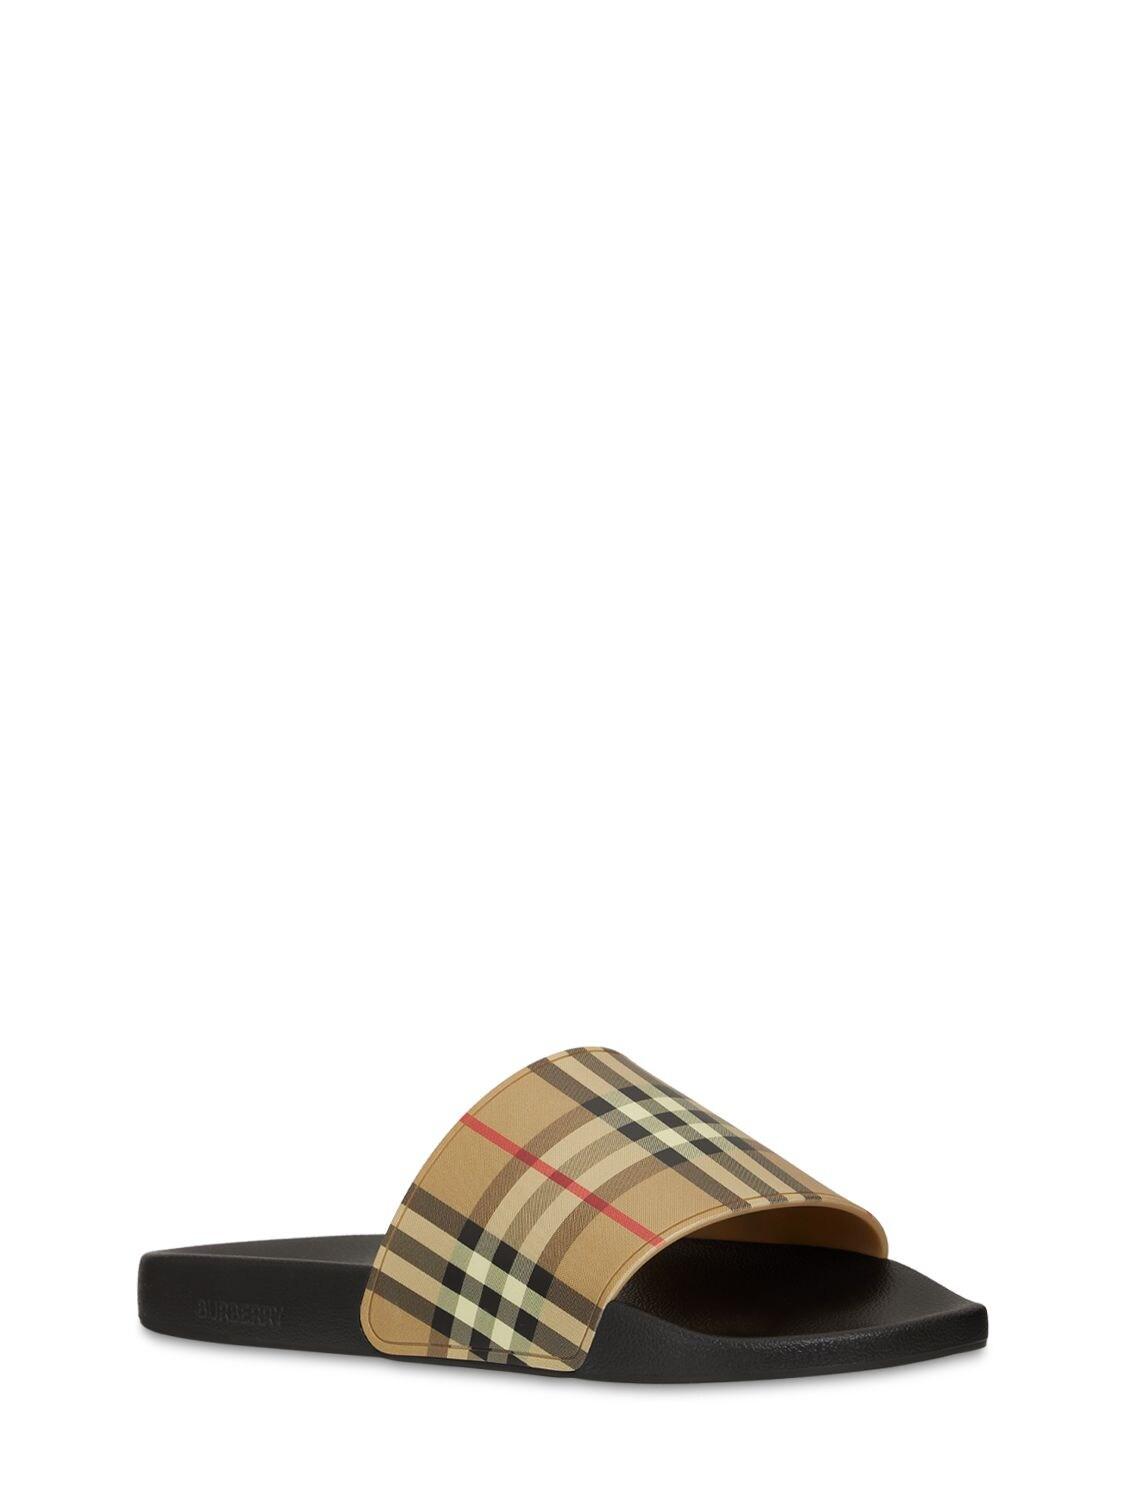 Burberry Rubber Check Slides for Men - Save 50% - Lyst